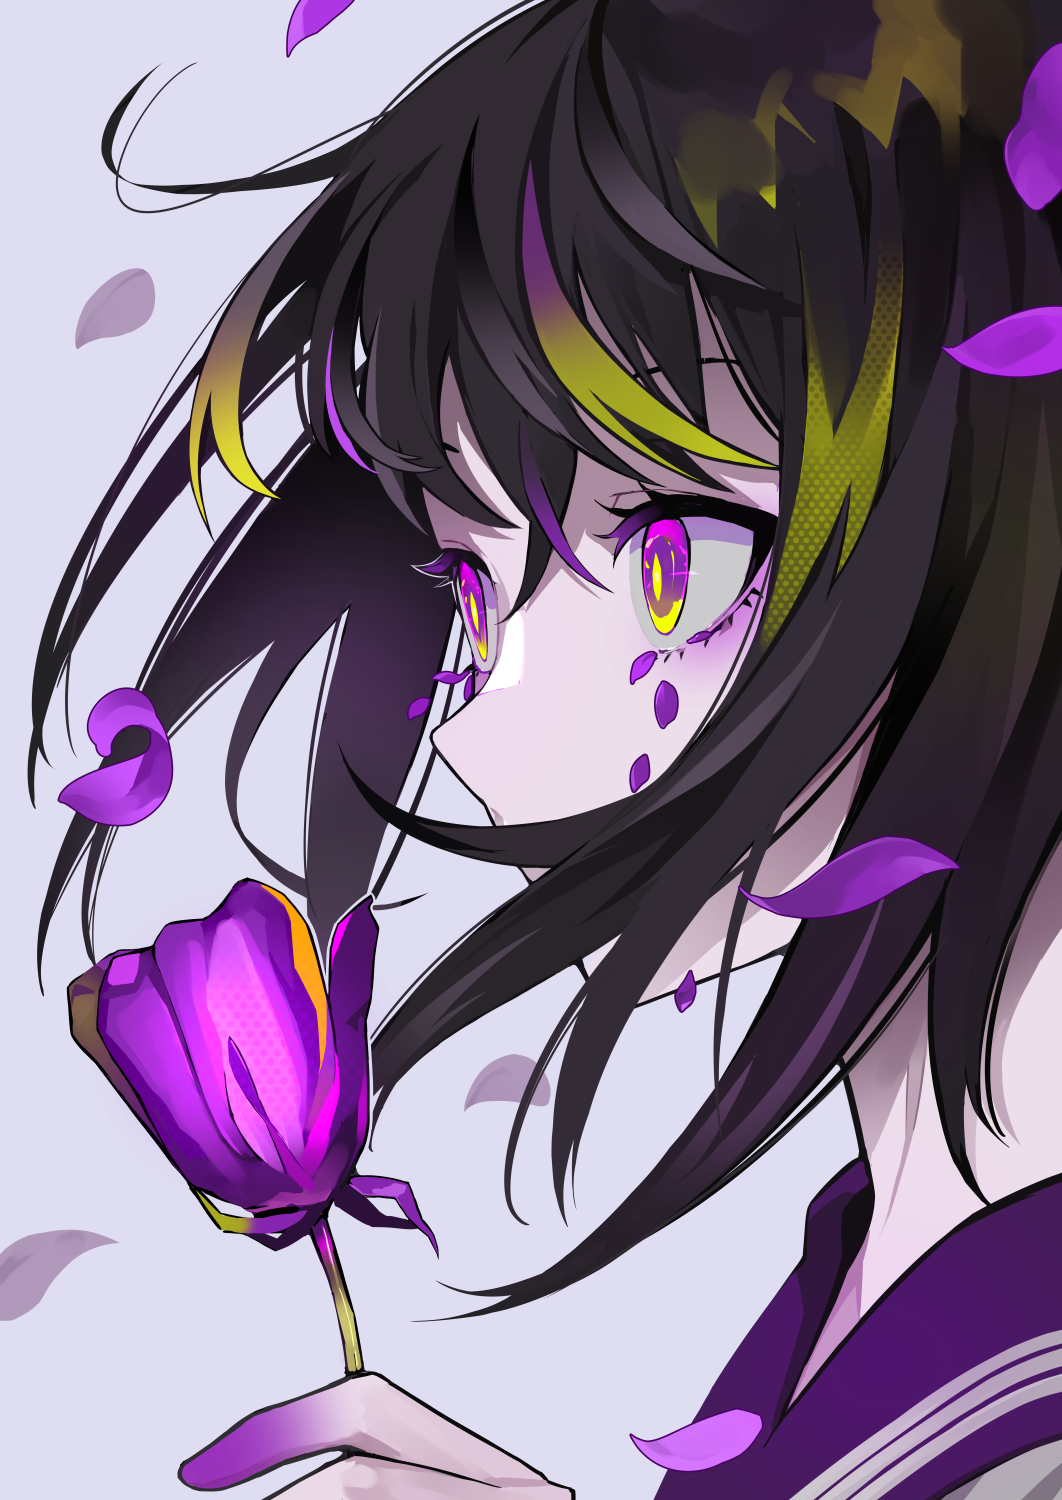 Anime 1062x1500 anime girls original characters dark hair purple eyes flowers petals crying profile hair in face white background simple background artwork digital art illustration drawing 2D portrait display LAM anime